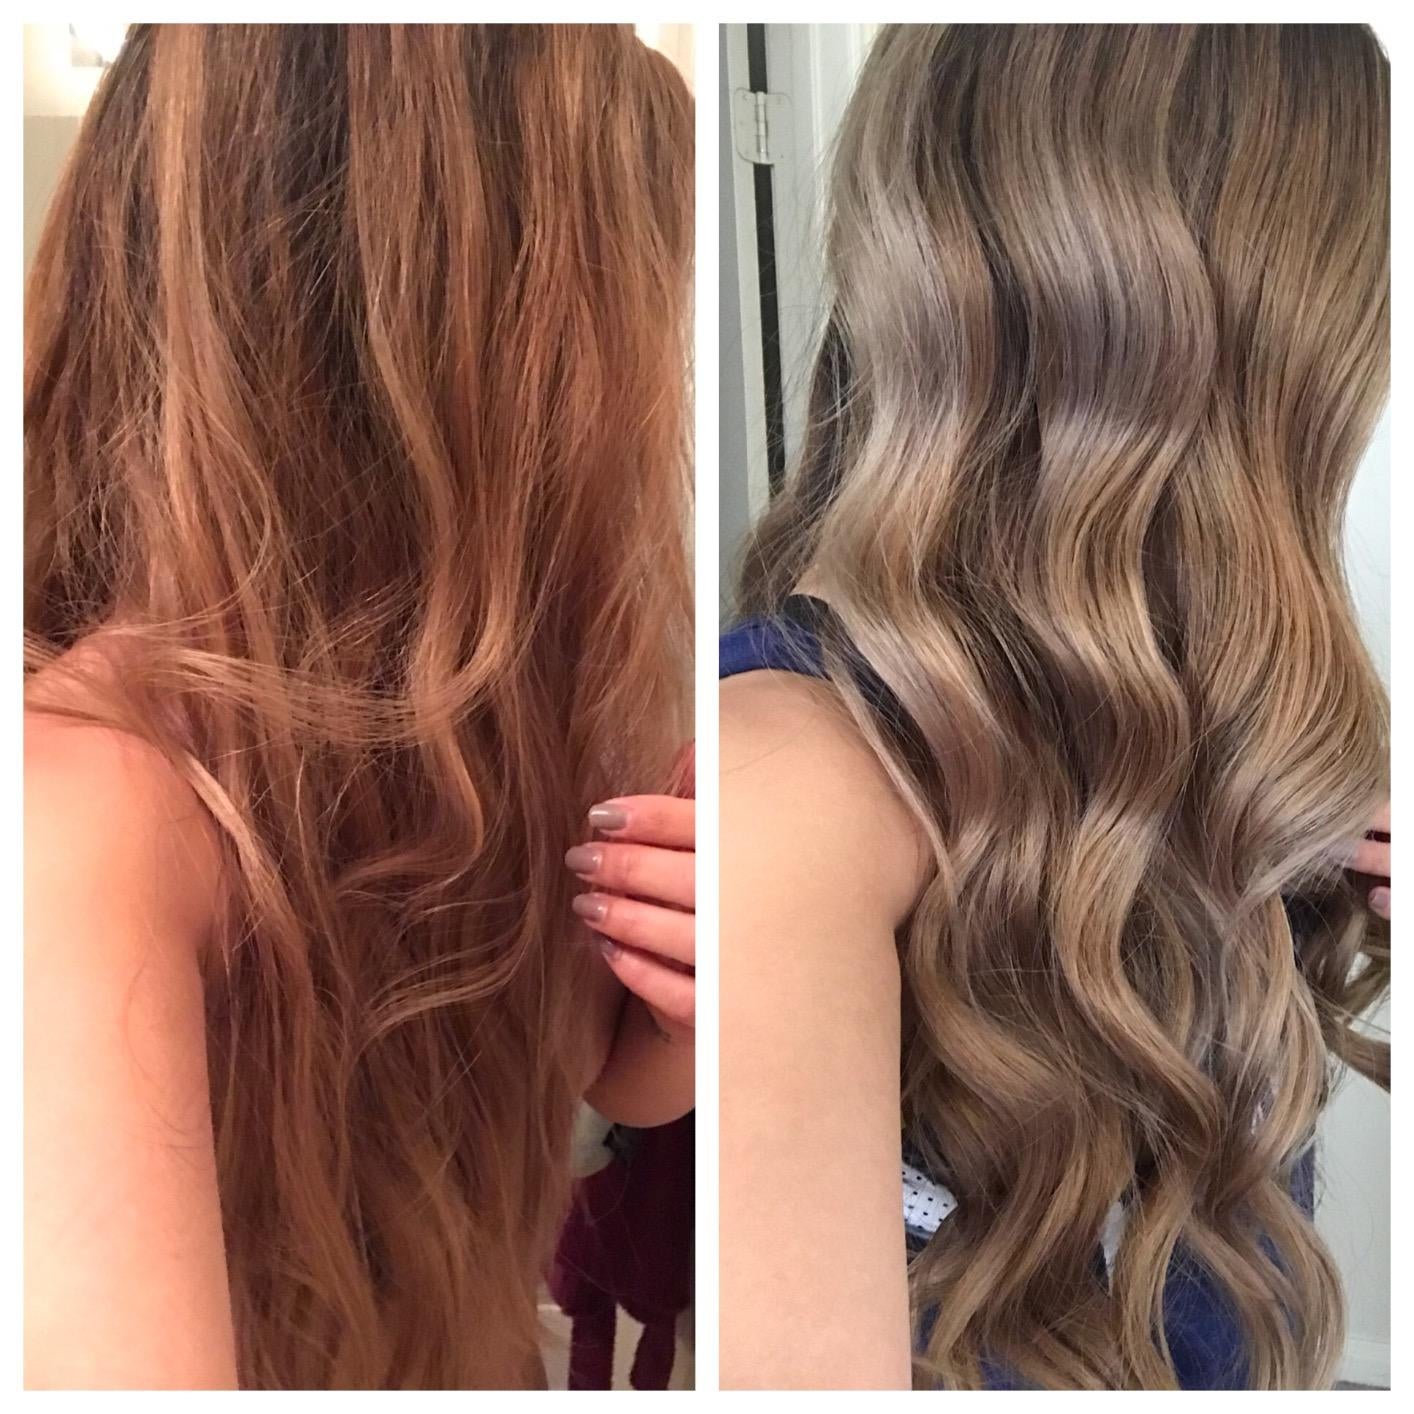 before and after images of a reviewer's orange and brassy hair becoming even and blonde